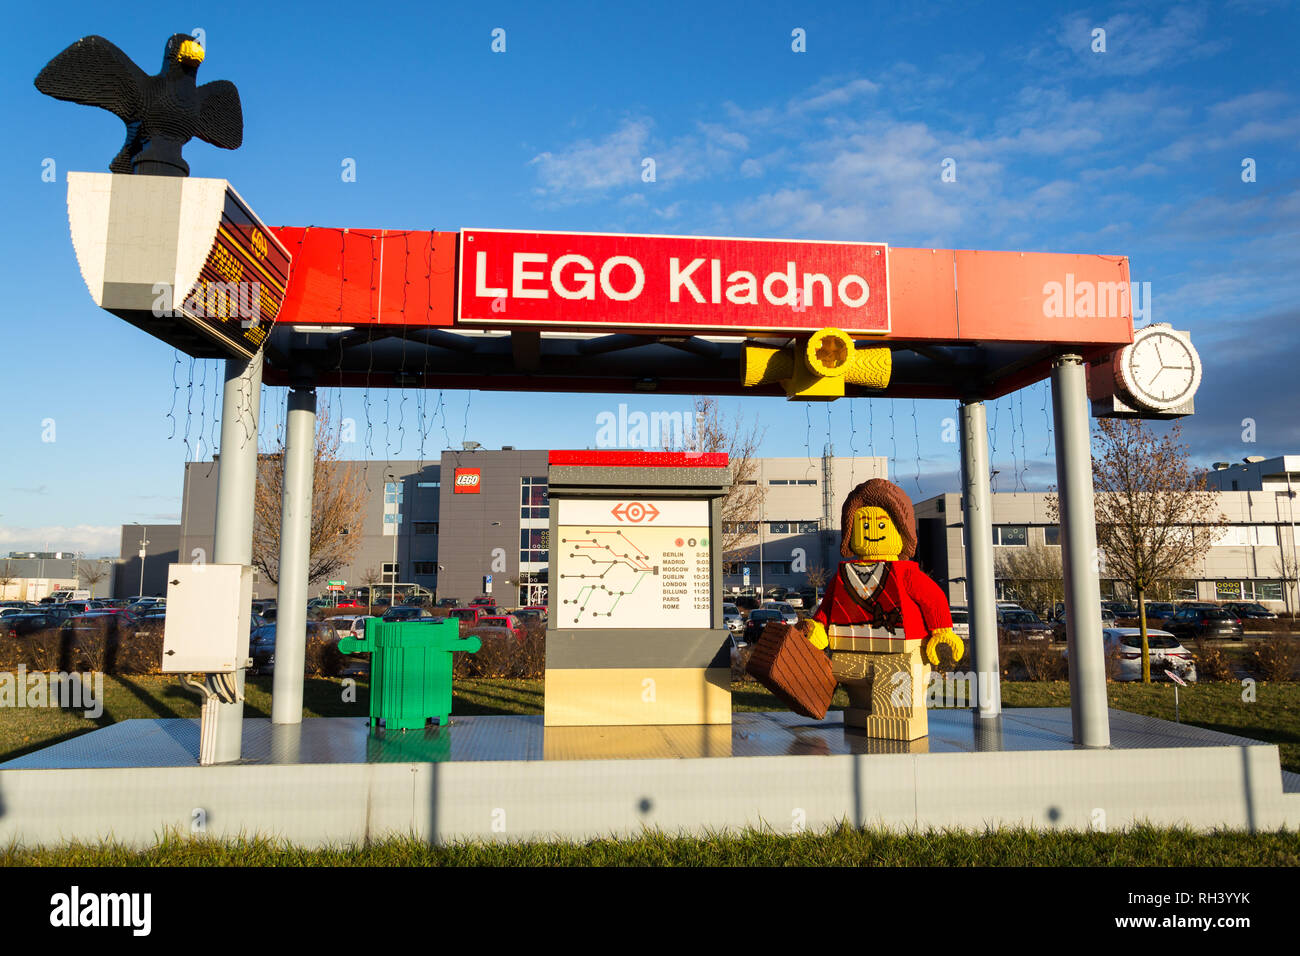 KLADNO, CZECH REPUBLIC - DECEMBER 4 2018: Brick models in front of the Lego Group company production factory building on December 4, 2018 in Kladno, C Stock Photo